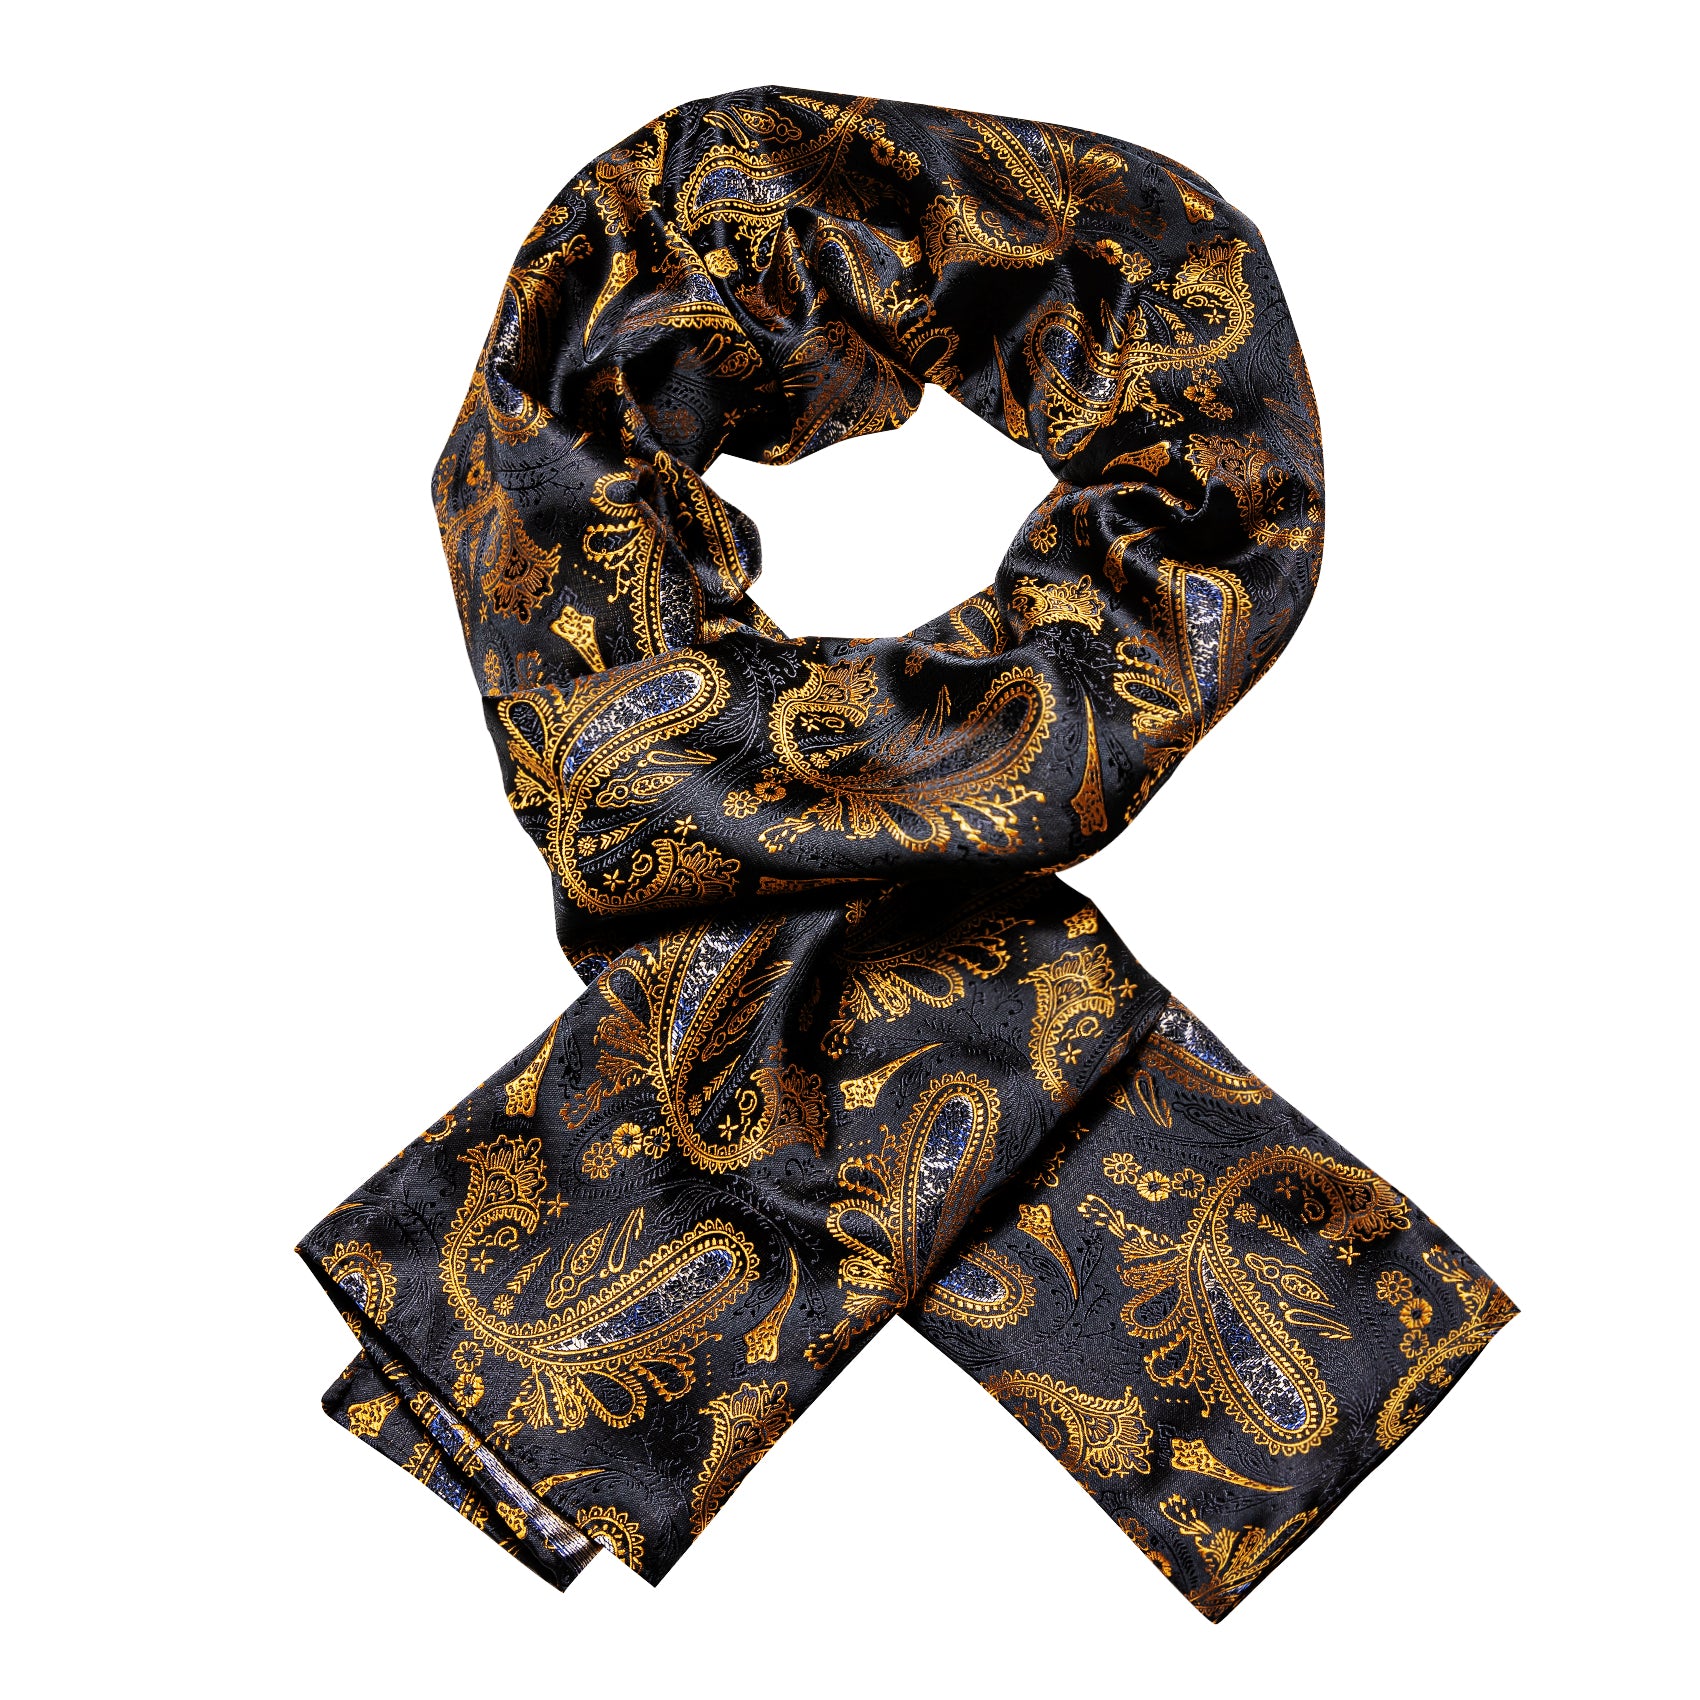 New Black Gold Paisley Scarf